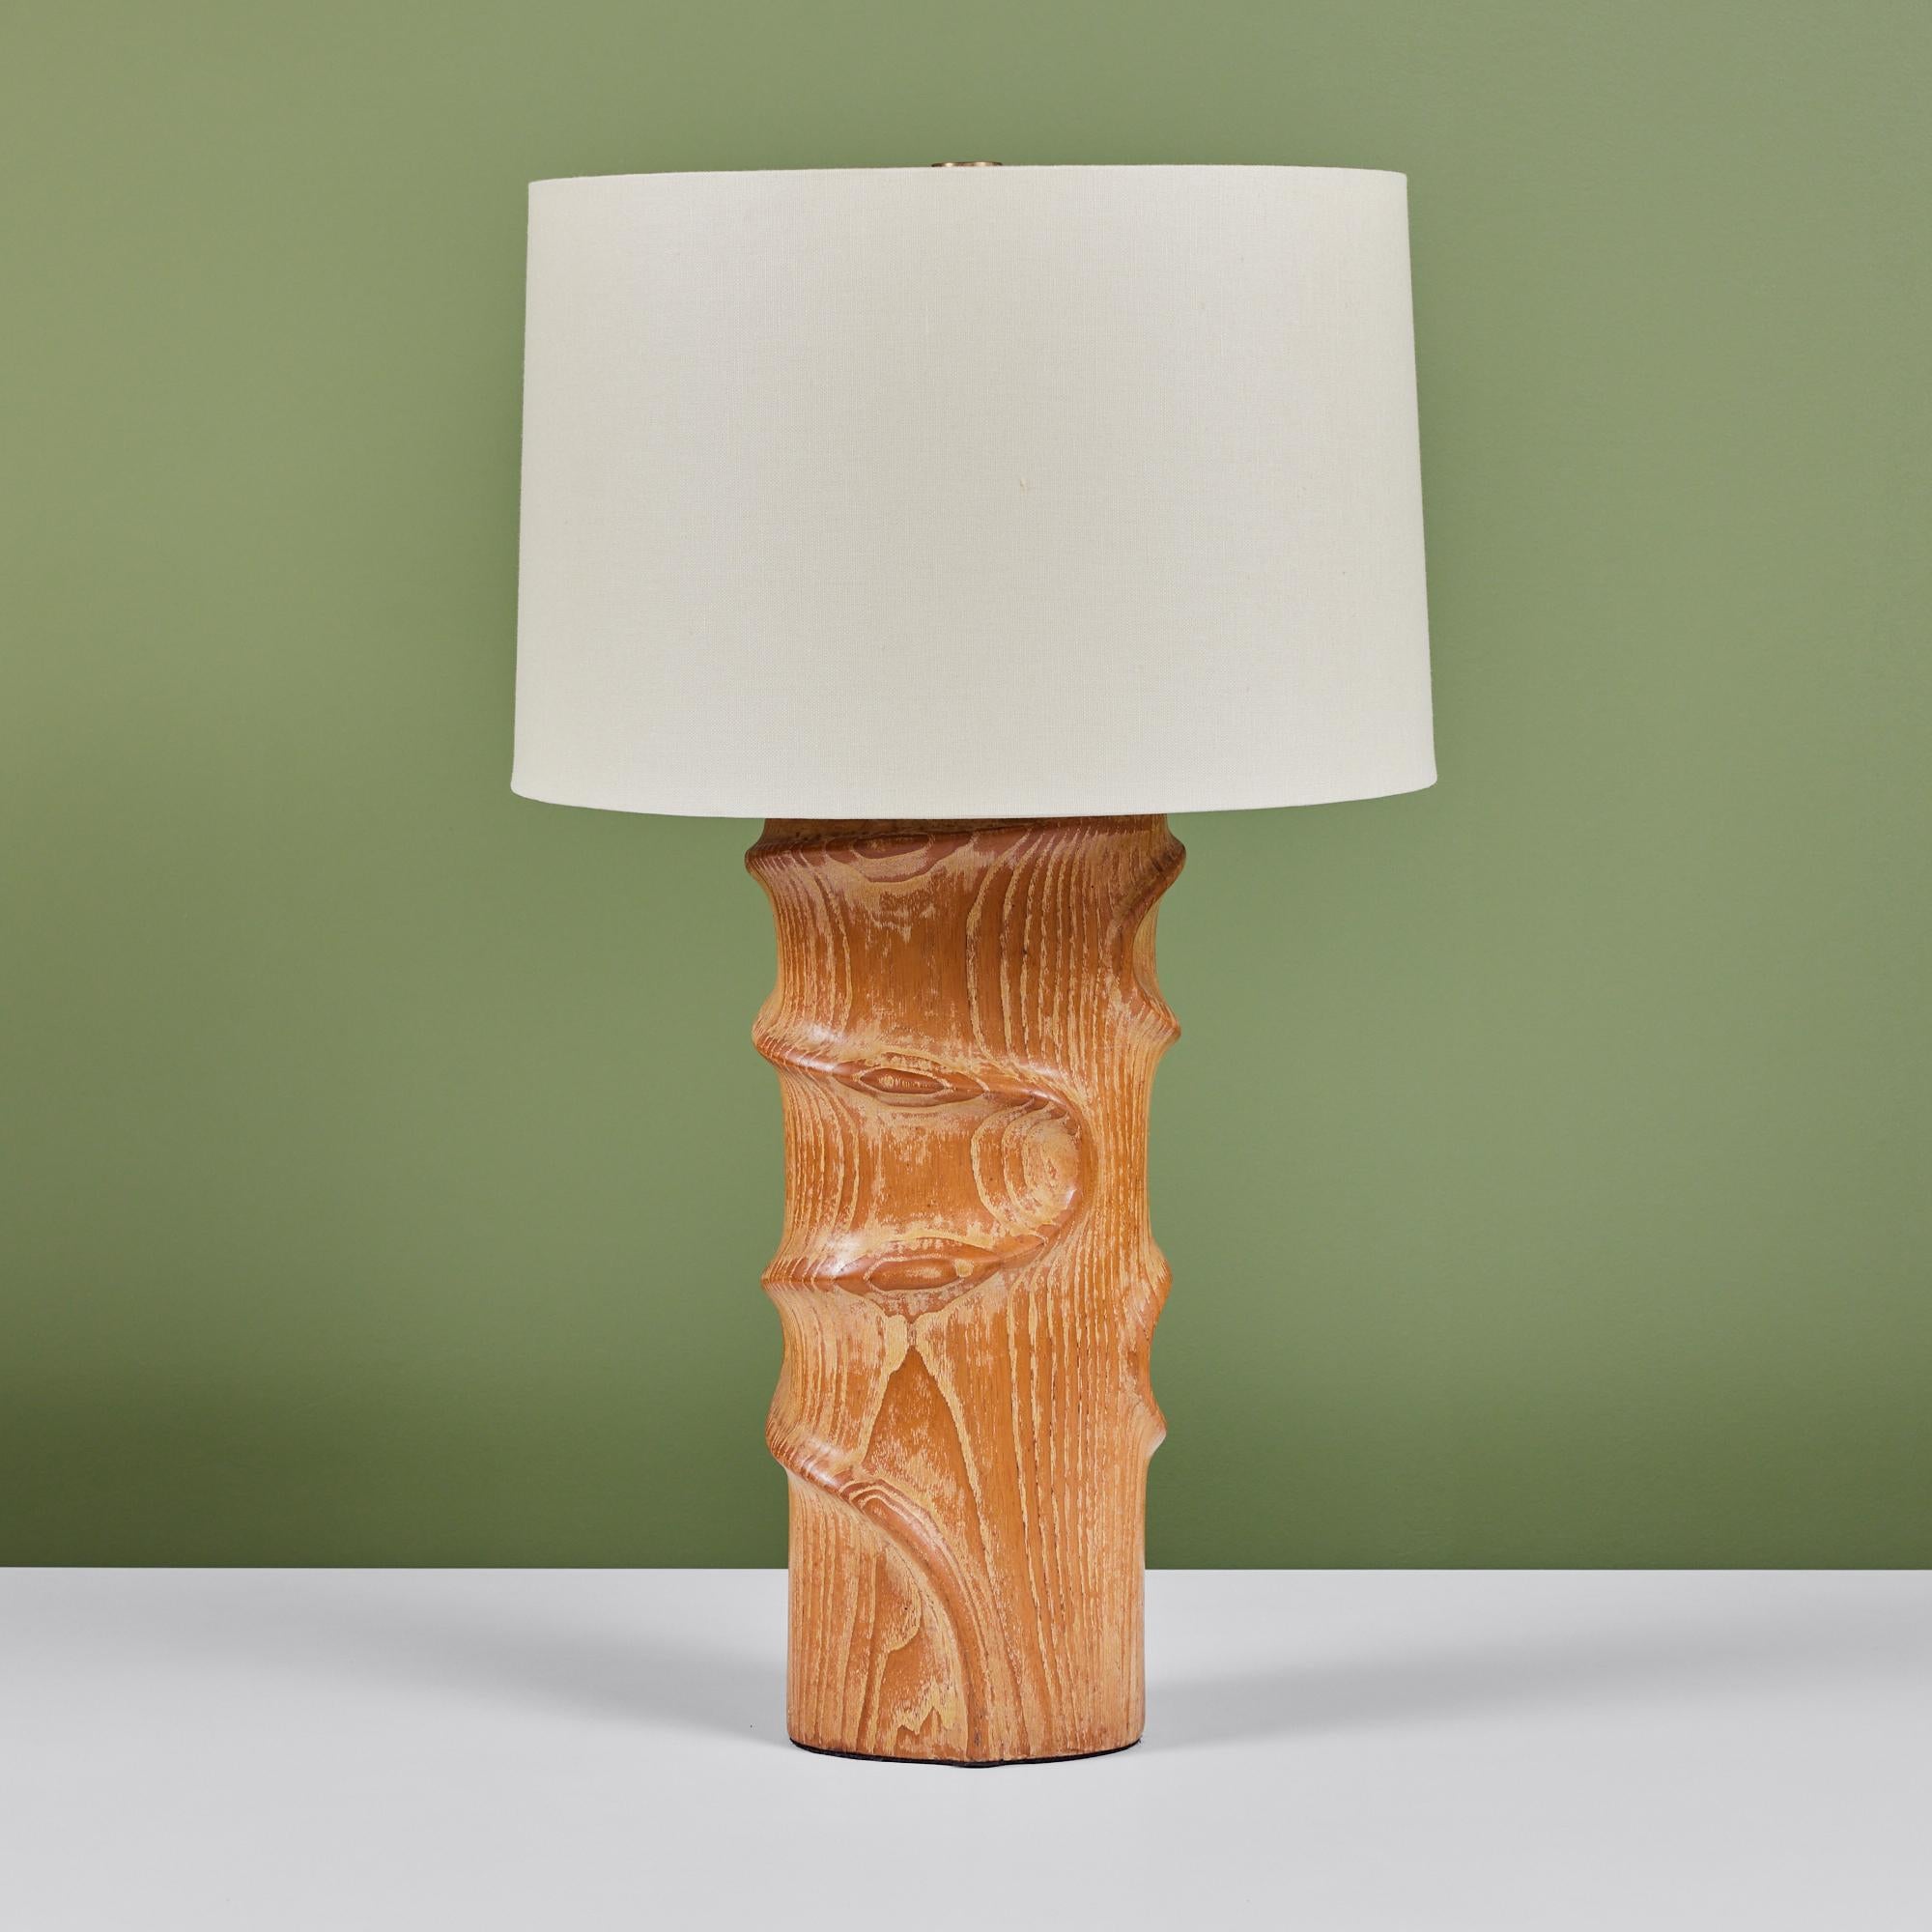 Oak table lamp in the style of mid-century designer, Yasha Heifetz. The lamp features a hand carved oak base with new white linen shade that attaches to the top of it's brass harp. The lamp has been newly rewired.

Dimensions
16